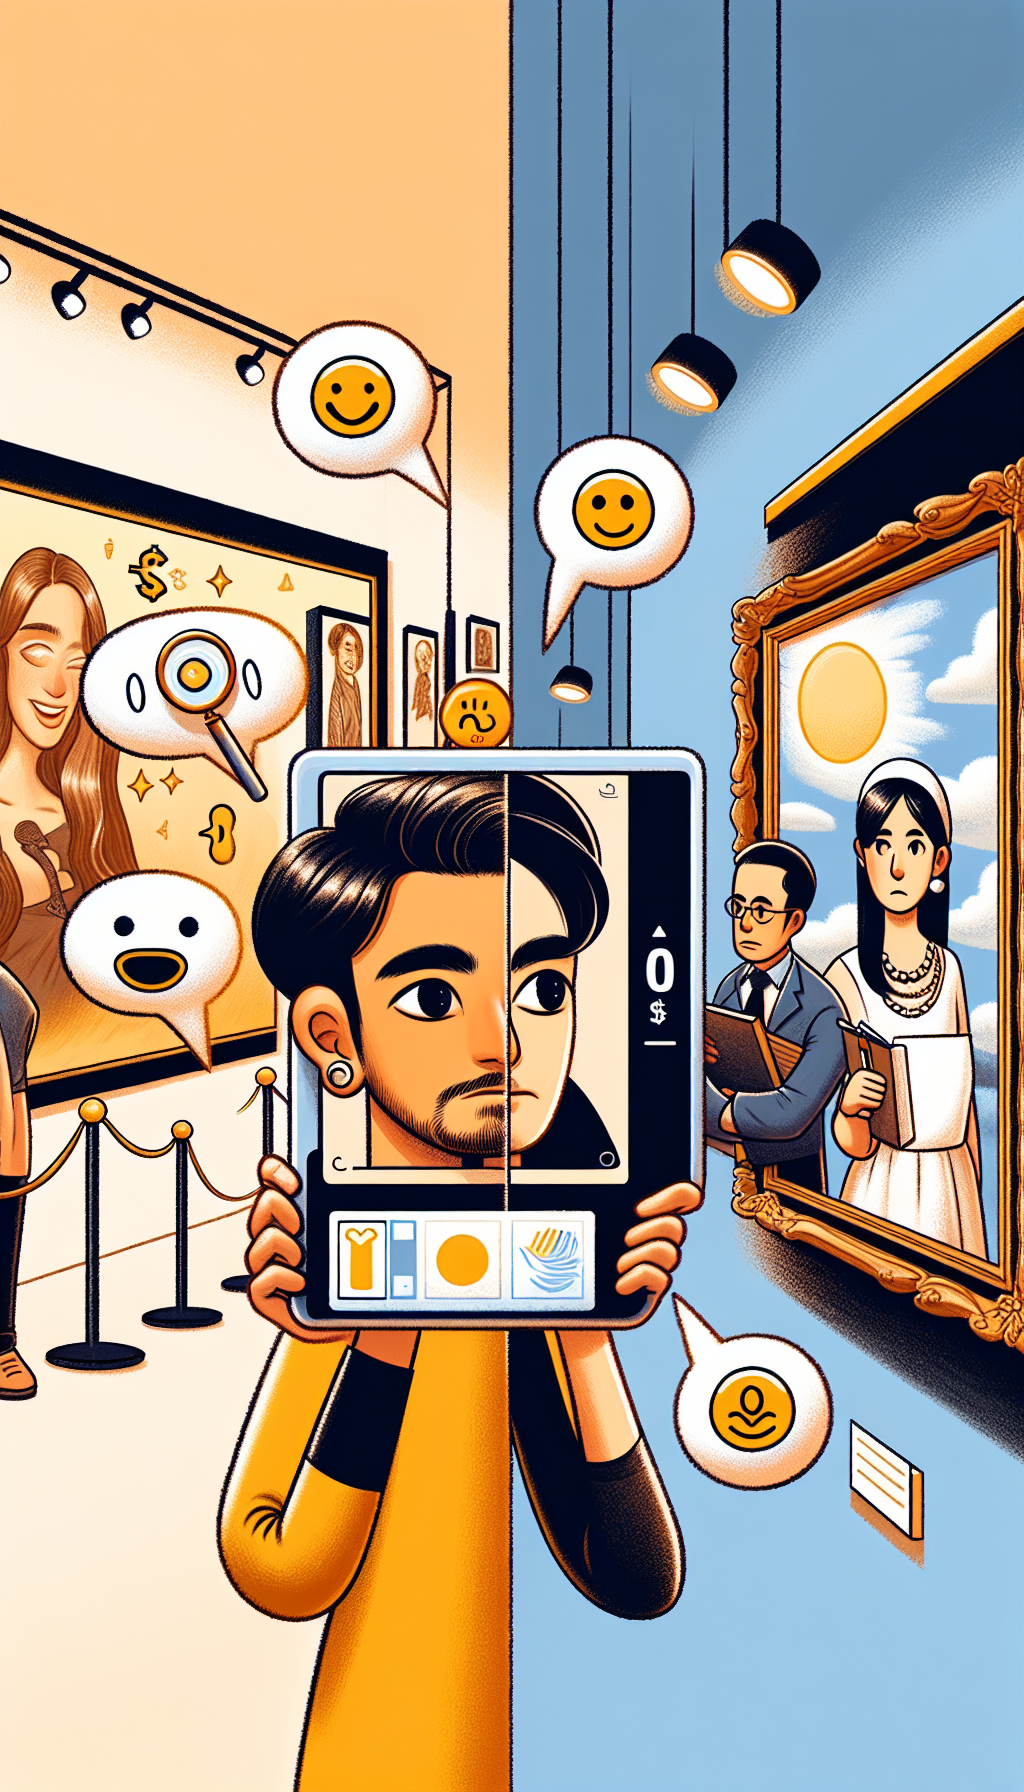 An illustration split down the middle, with one half depicting an artist holding a digital tablet showcasing their artwork with smiley and sad emoticon bubbles floating above, symbolizing pros and cons. The other half shows an artist in a gallery with a curator examining a painting, emoticon bubbles similarly floating. A magnifying glass with a "0$" sign sits atop a map pin, uniting both scenes.